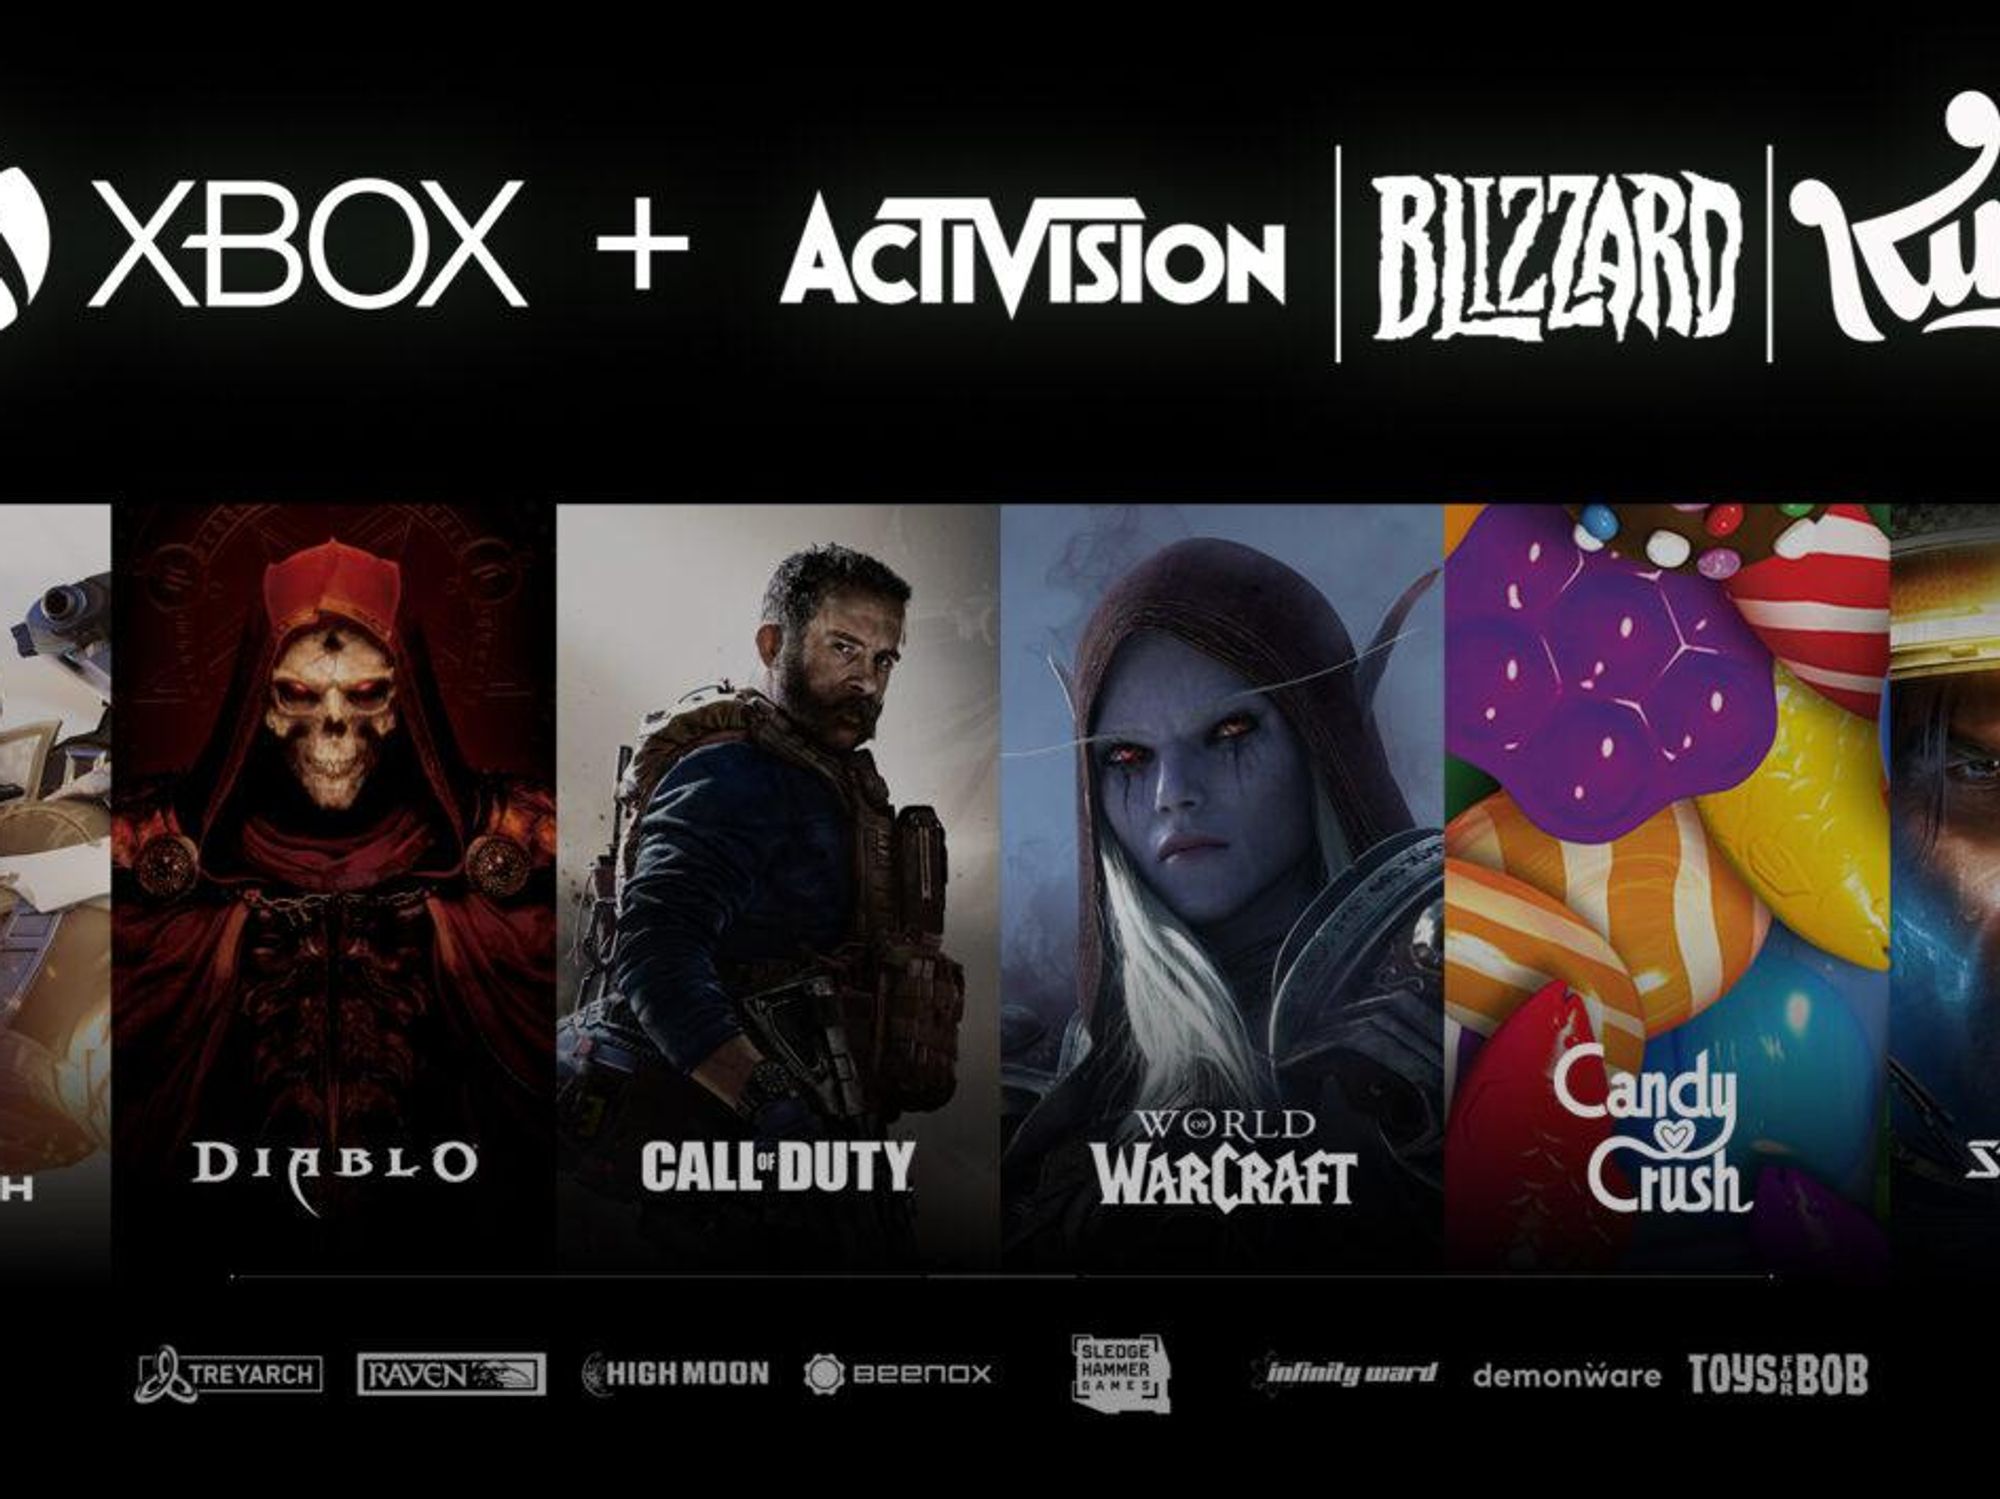 Xbox\u2019s various game developers it now owns: Activision, Blizzard and King.